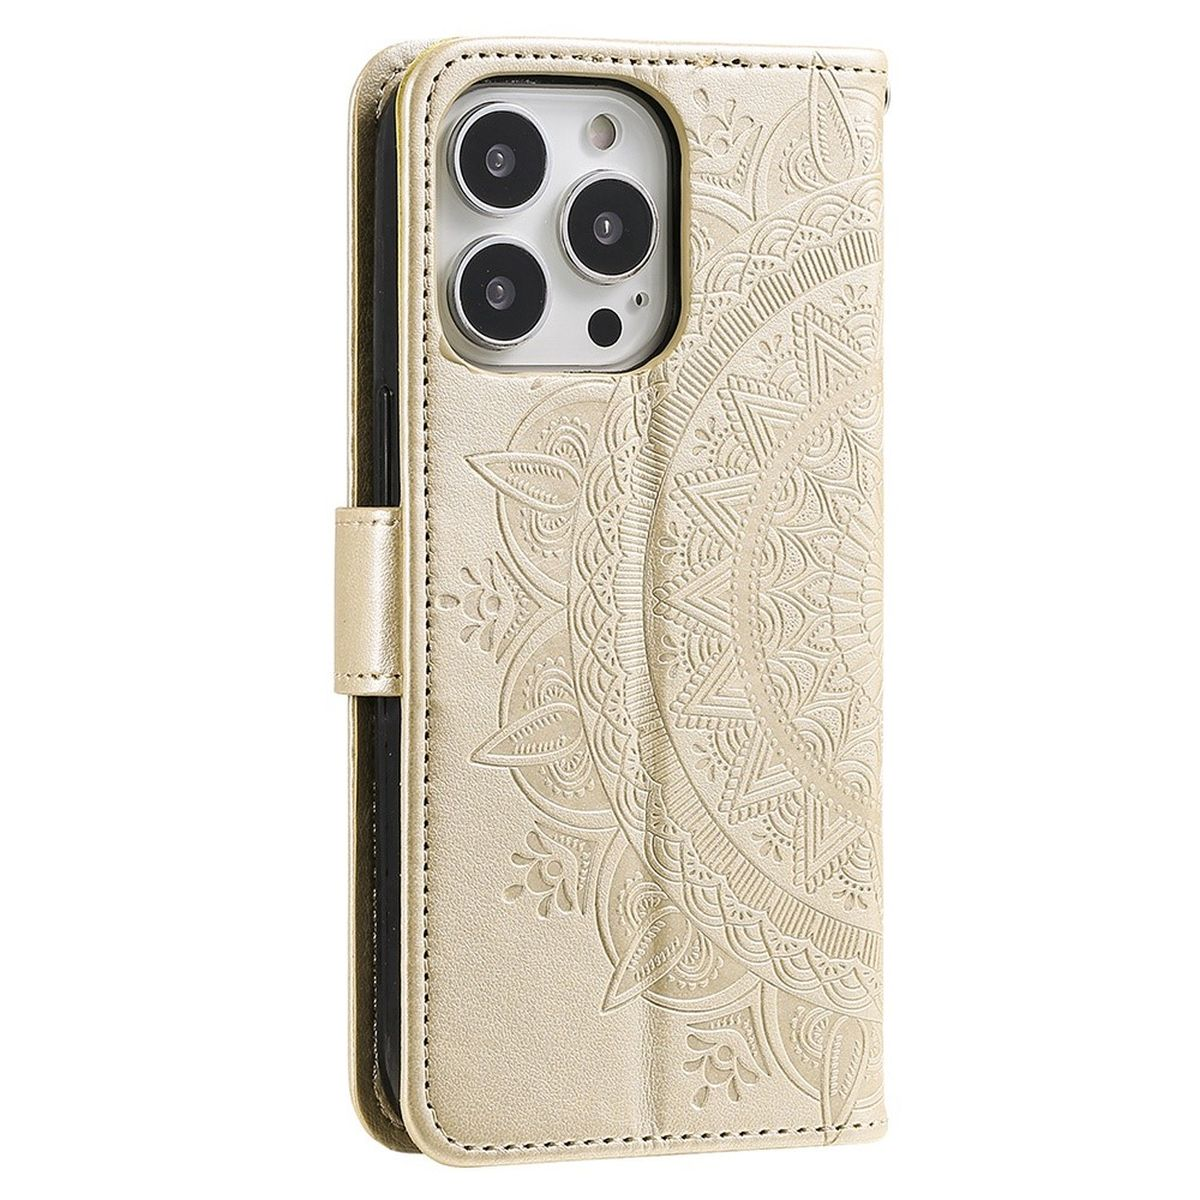 Max, iPhone Bookcover, Klapphülle 14 COVERKINGZ Gold Apple, Mandala Pro mit Muster,